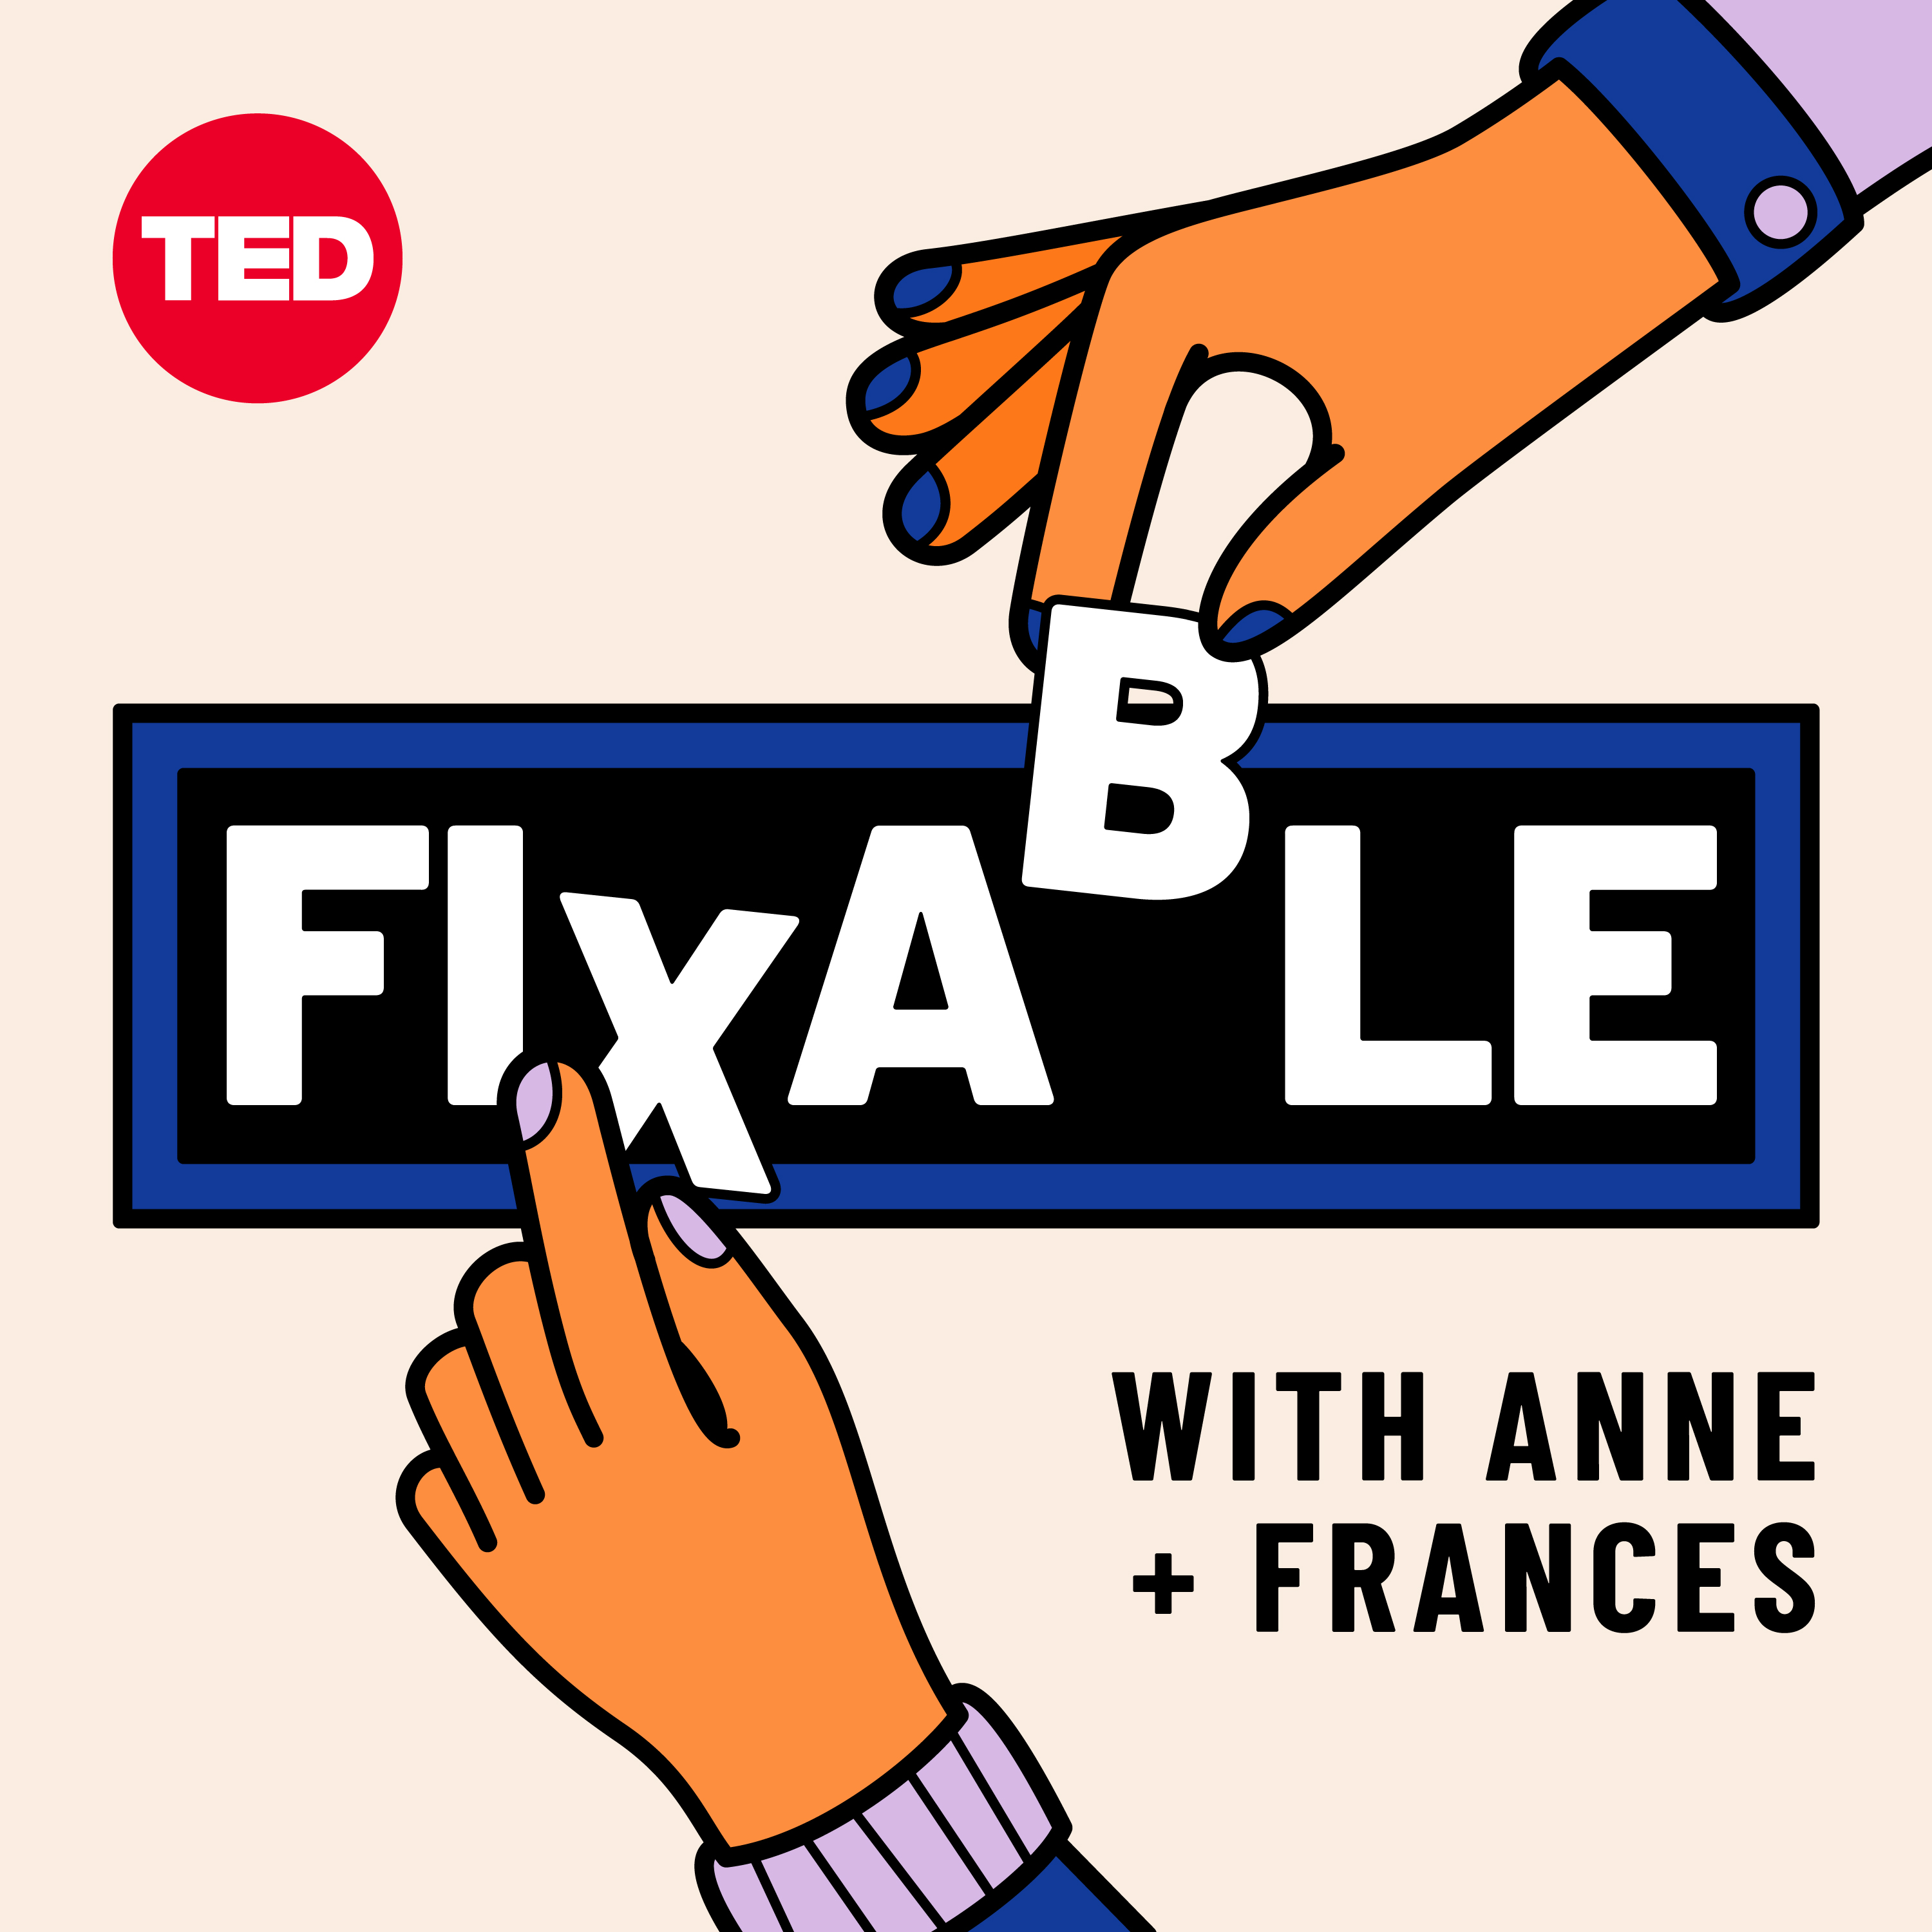 Fixable: Kelli - ”How do I deal with a communication breakdown?”